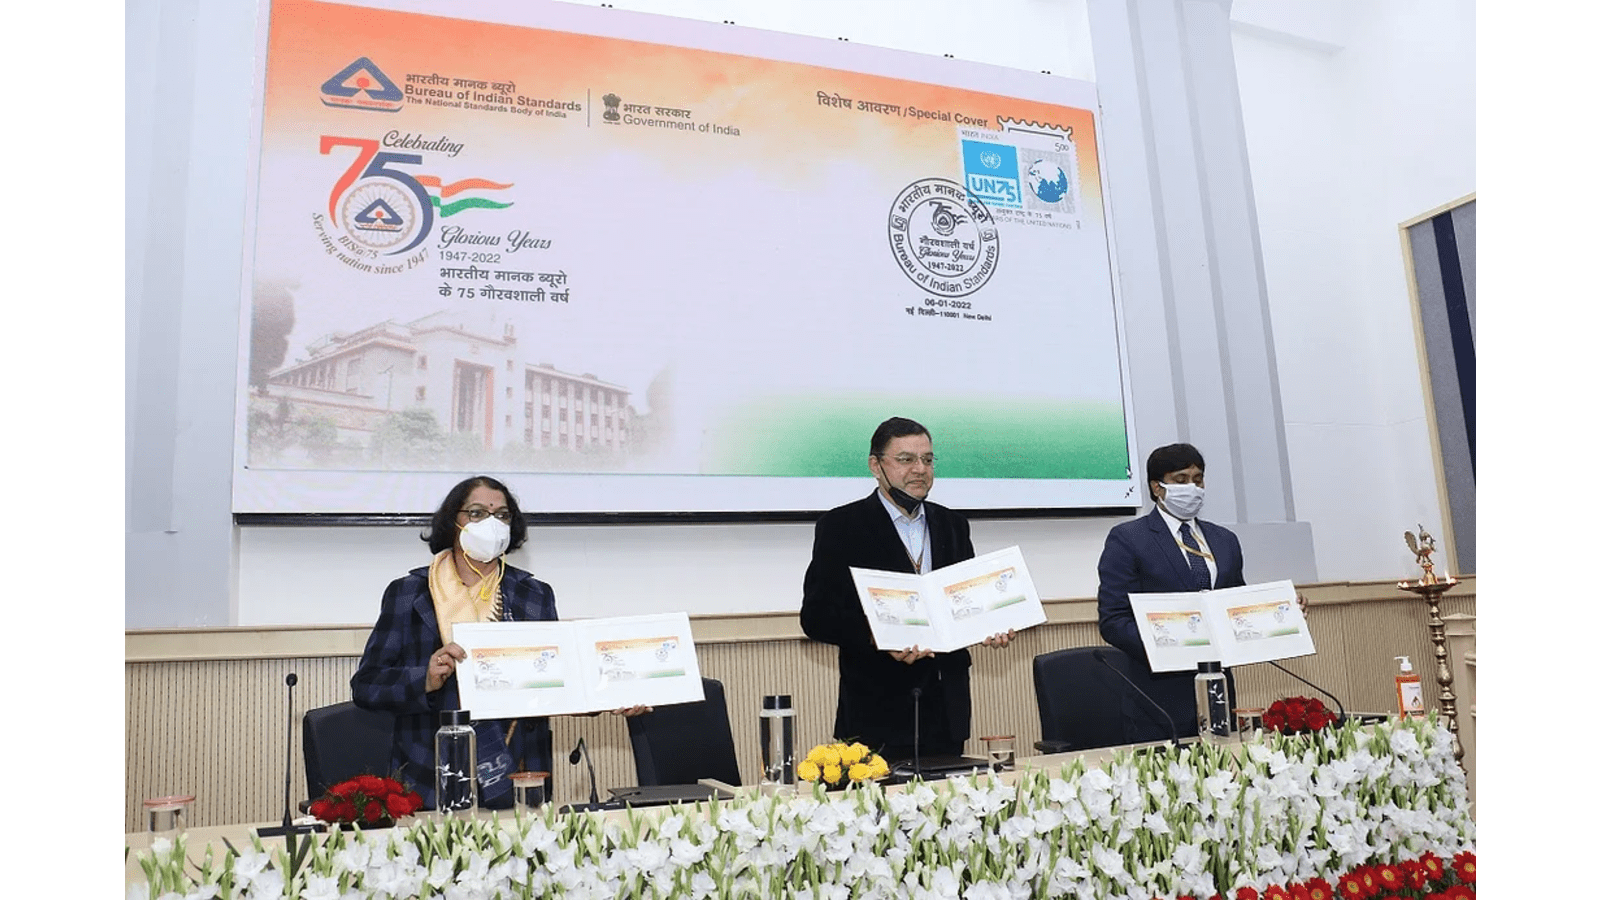 Bureau of Indian Standards commemorates 75 years of existence